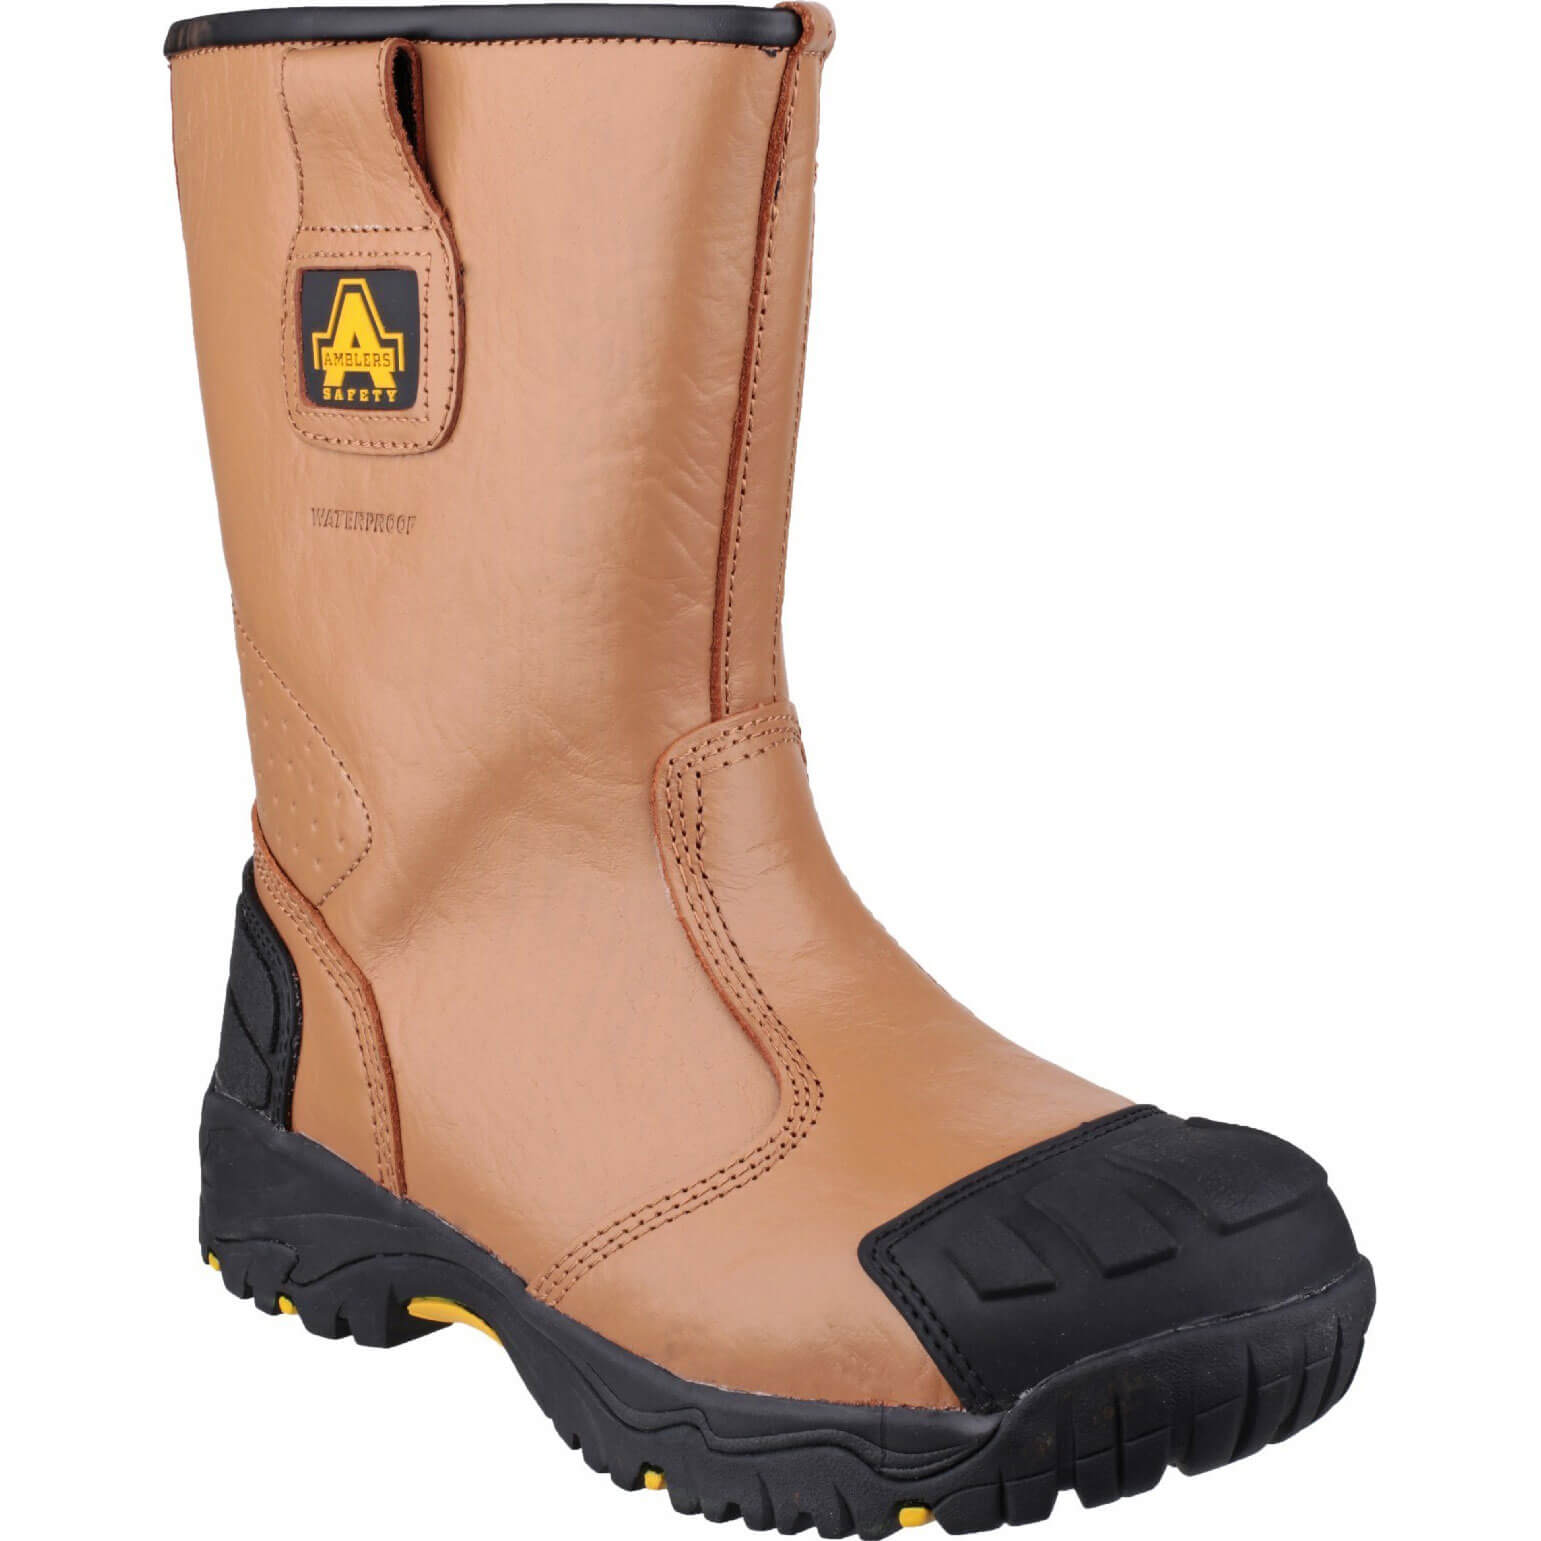 Photo of Amblers Mens Safety Fs143 Waterproof Safety Rigger Boots Tan Size 14